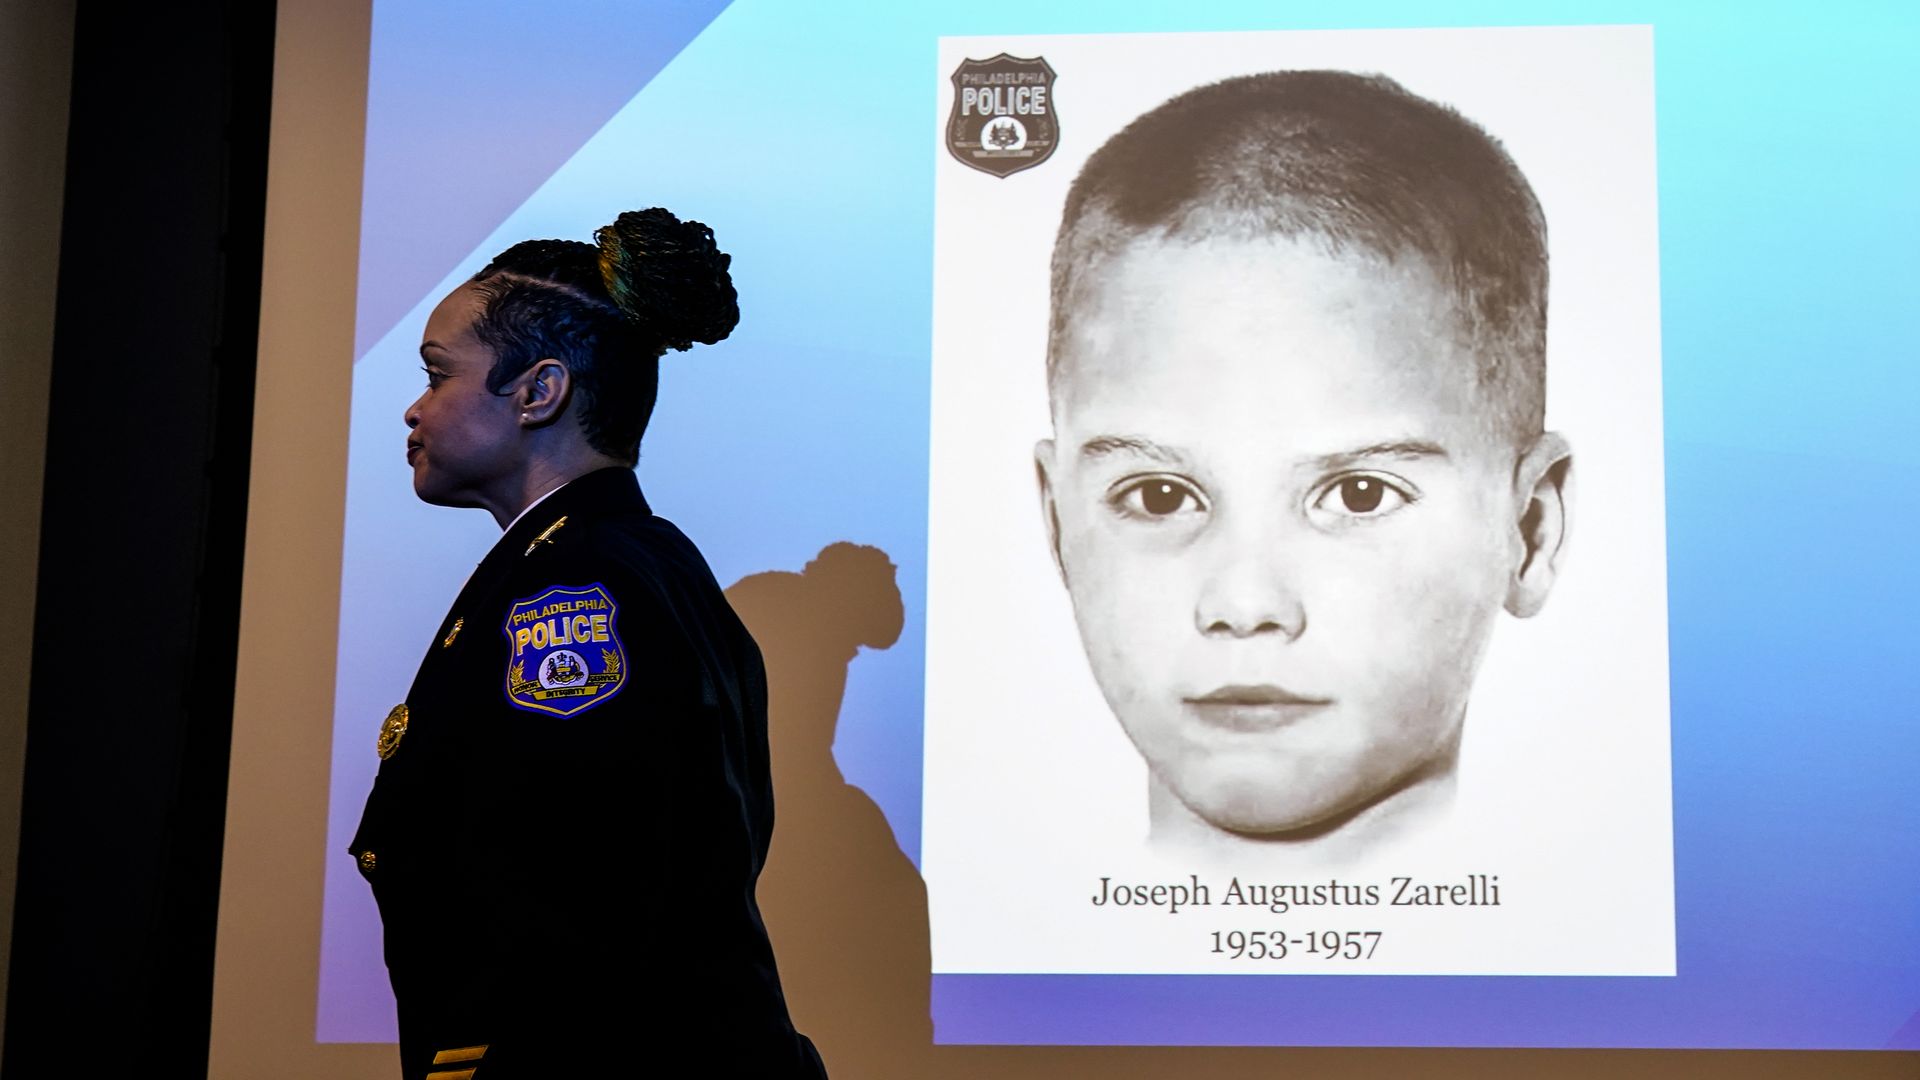 Philadelphia Police Commissioner Danielle Outlaw and a picture of Joseph Augustus Zarelli, the latter of whom is known as the "Boy in the Box."